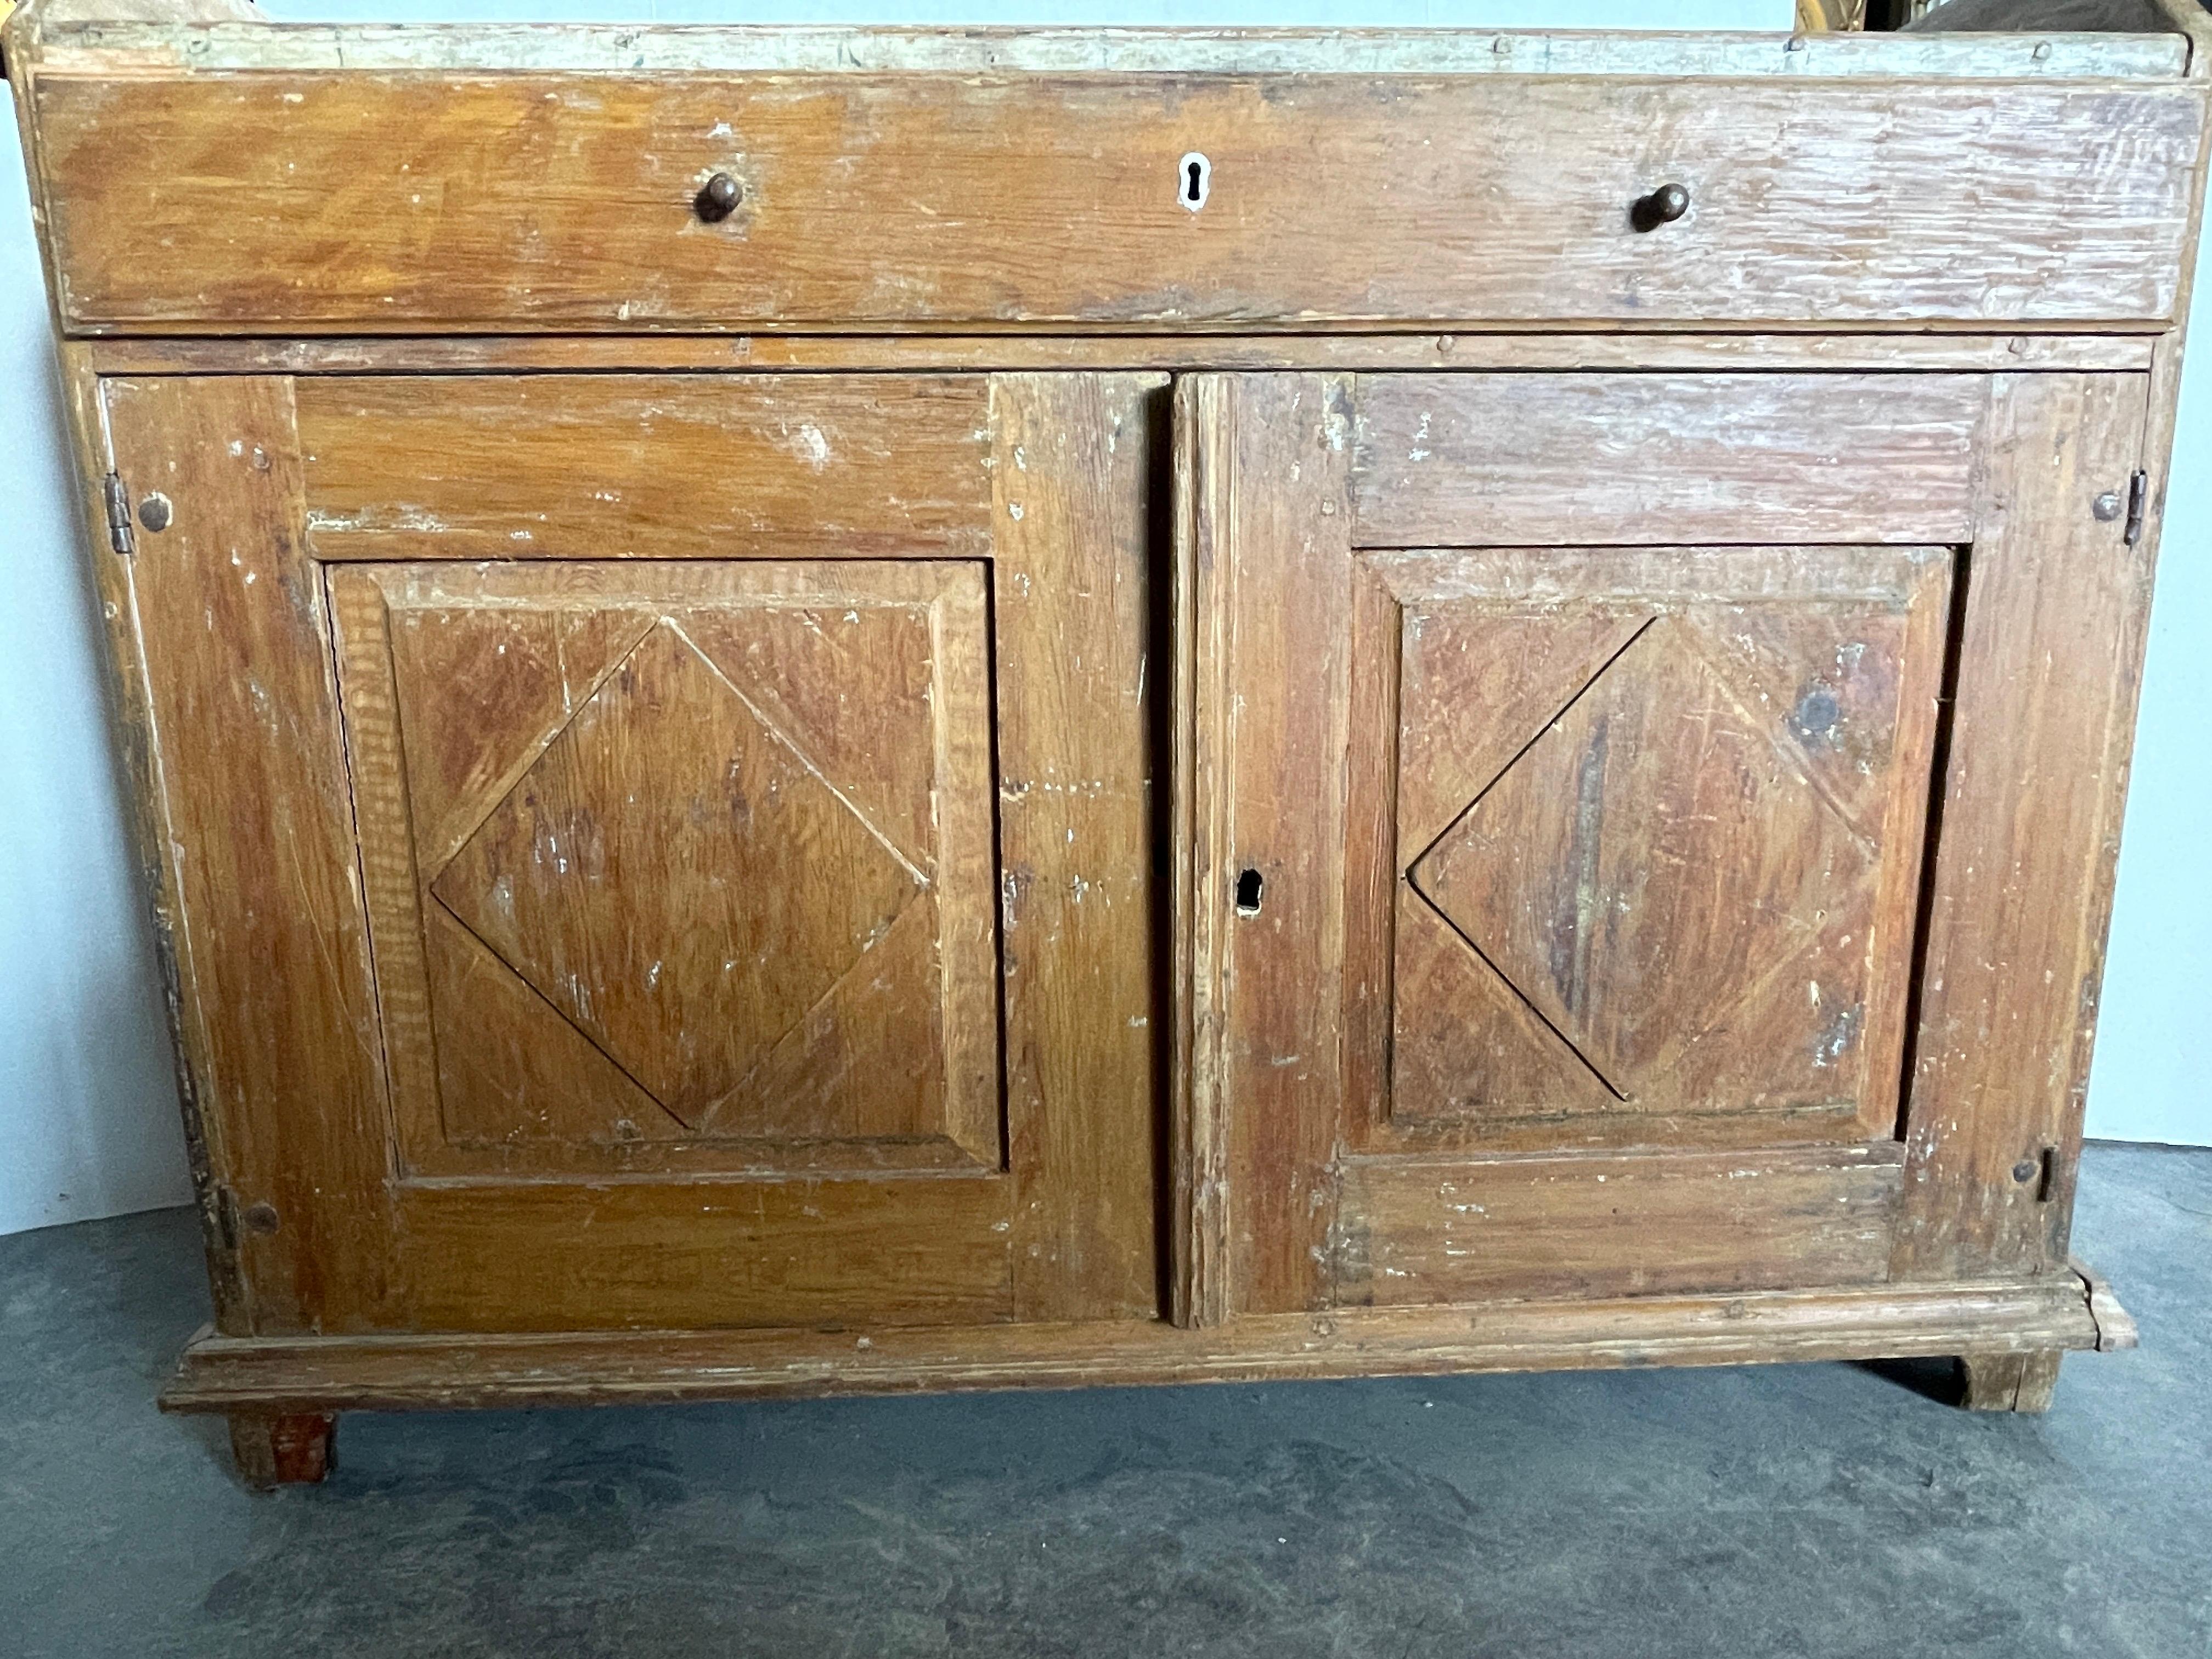 This 19th century Gustavian style buffet originated from Sweden. It has wonderful craftmanship throughout with hand carved wooden pulls, wood pegging, faux marbleized paint on the top and even hand carved feet.
The front face diamond shape on the